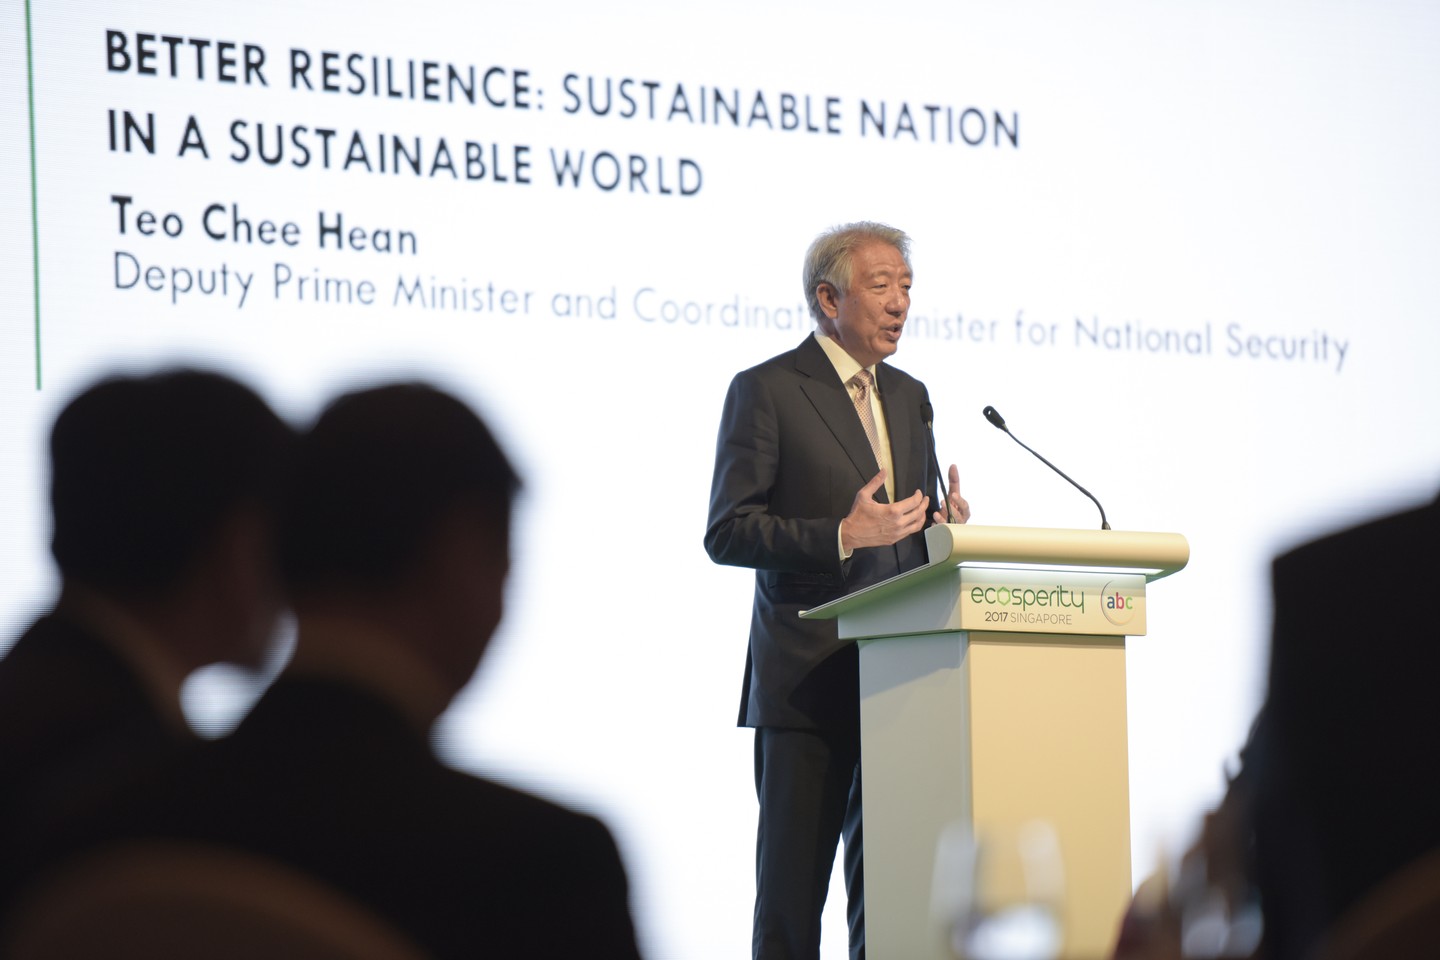 Teo Chee Hean, Singapore's deputy prime minister and coordinating minister for natural security, shares Singapore's sustainable development story at the Ecosperity 2017 conference, organised by Temasek. Image: Temasek